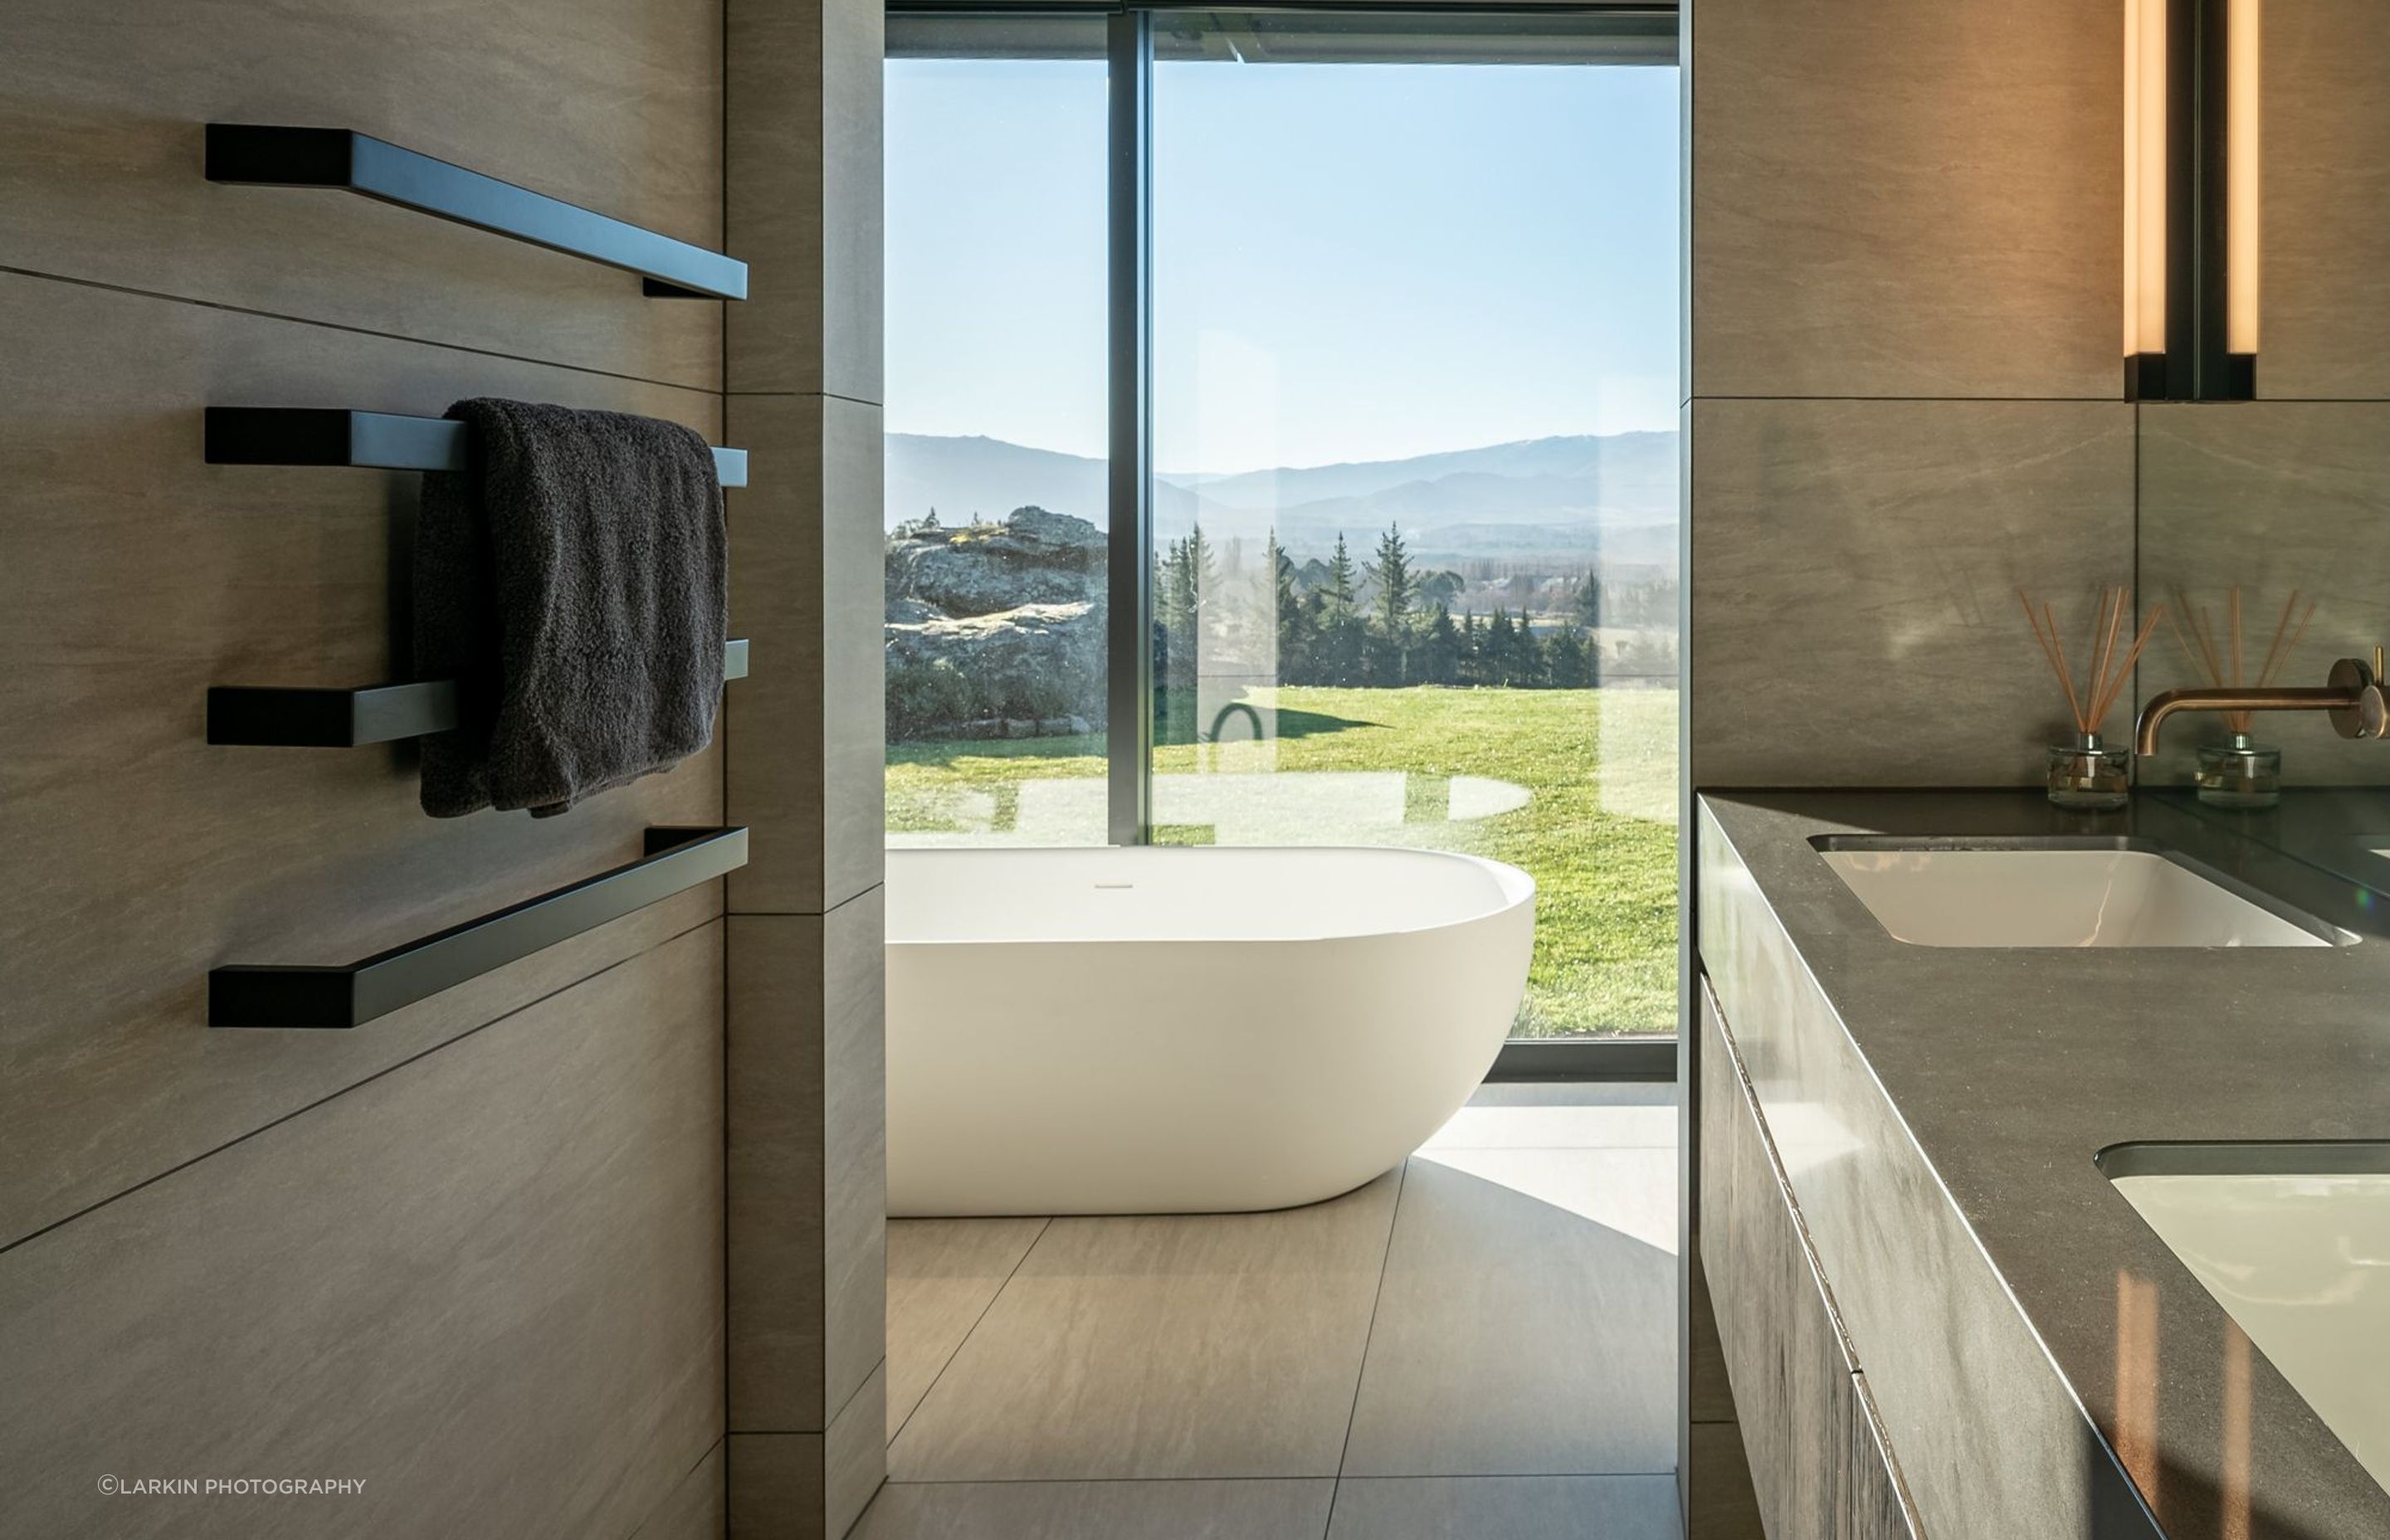 The master suite's freestanding bath enjoys an idyllic view to the lawn and views beyond.